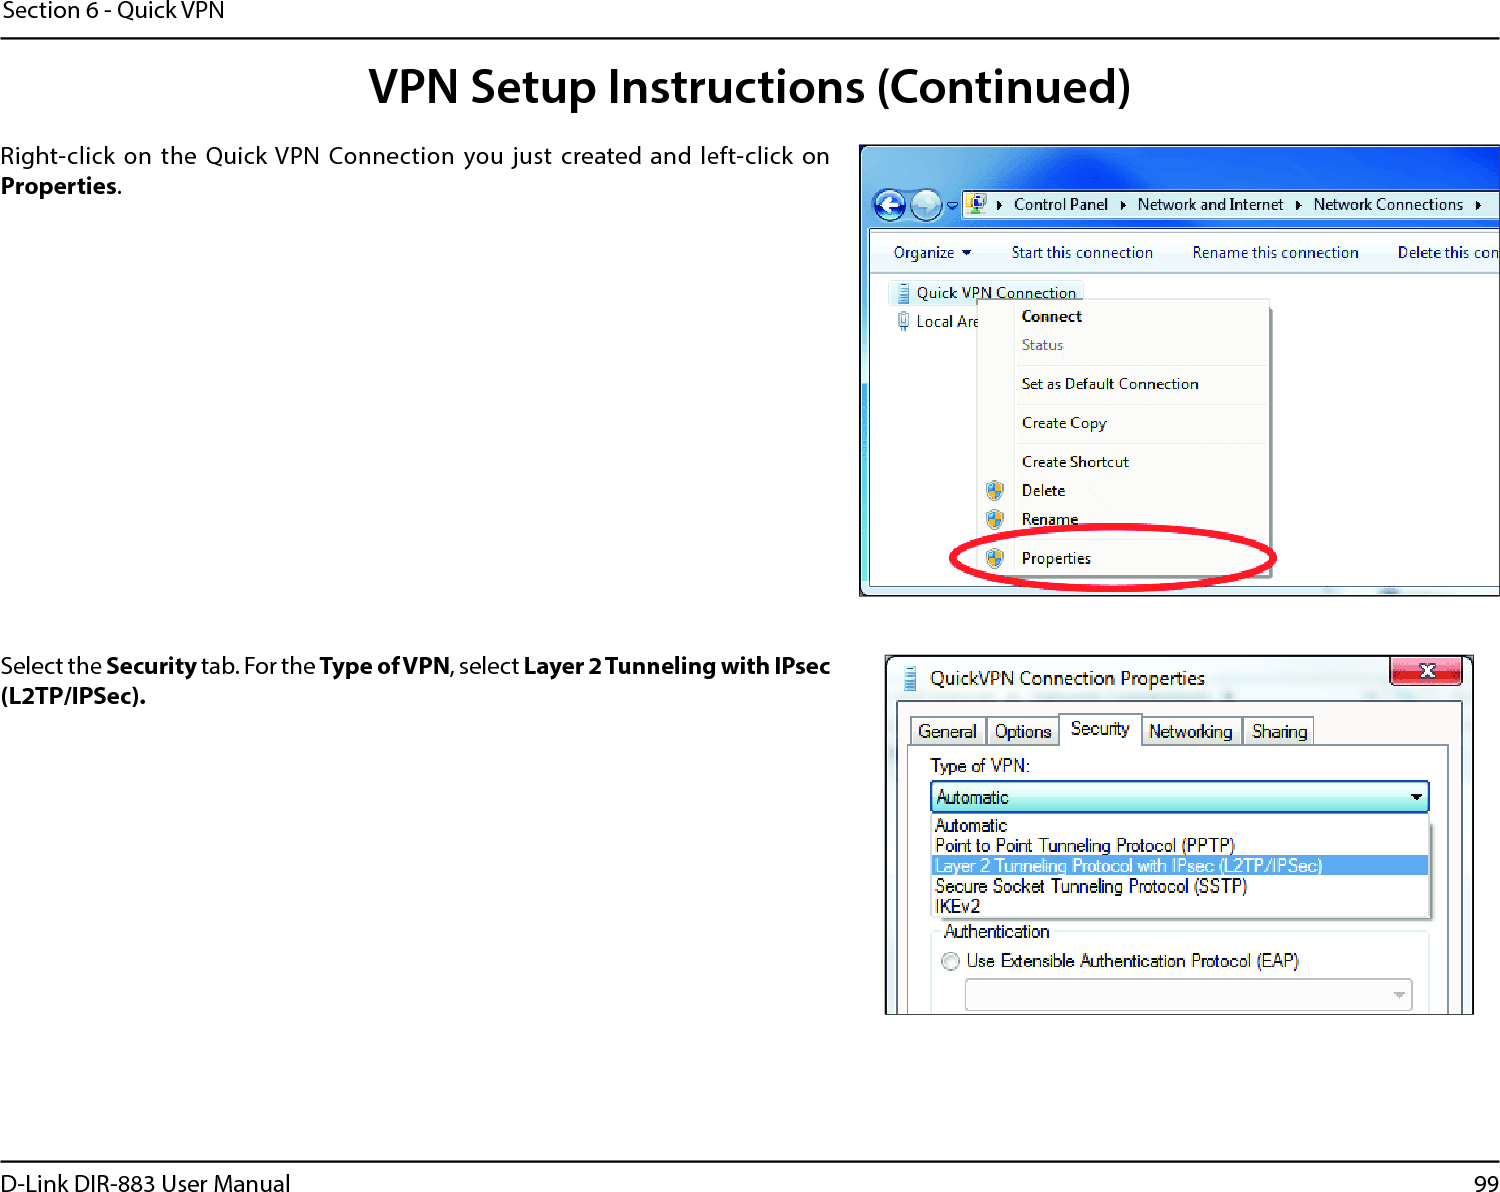 99D-Link DIR-883 User ManualSection 6 - Quick VPNSelect the Security tab. For the Type of VPN, select Layer2Tunneling with IPsec (L2TP/IPSec). Right-click on the  Quick VPN Connection you  just created and  left-click  on Properties.VPN Setup Instructions (Continued)